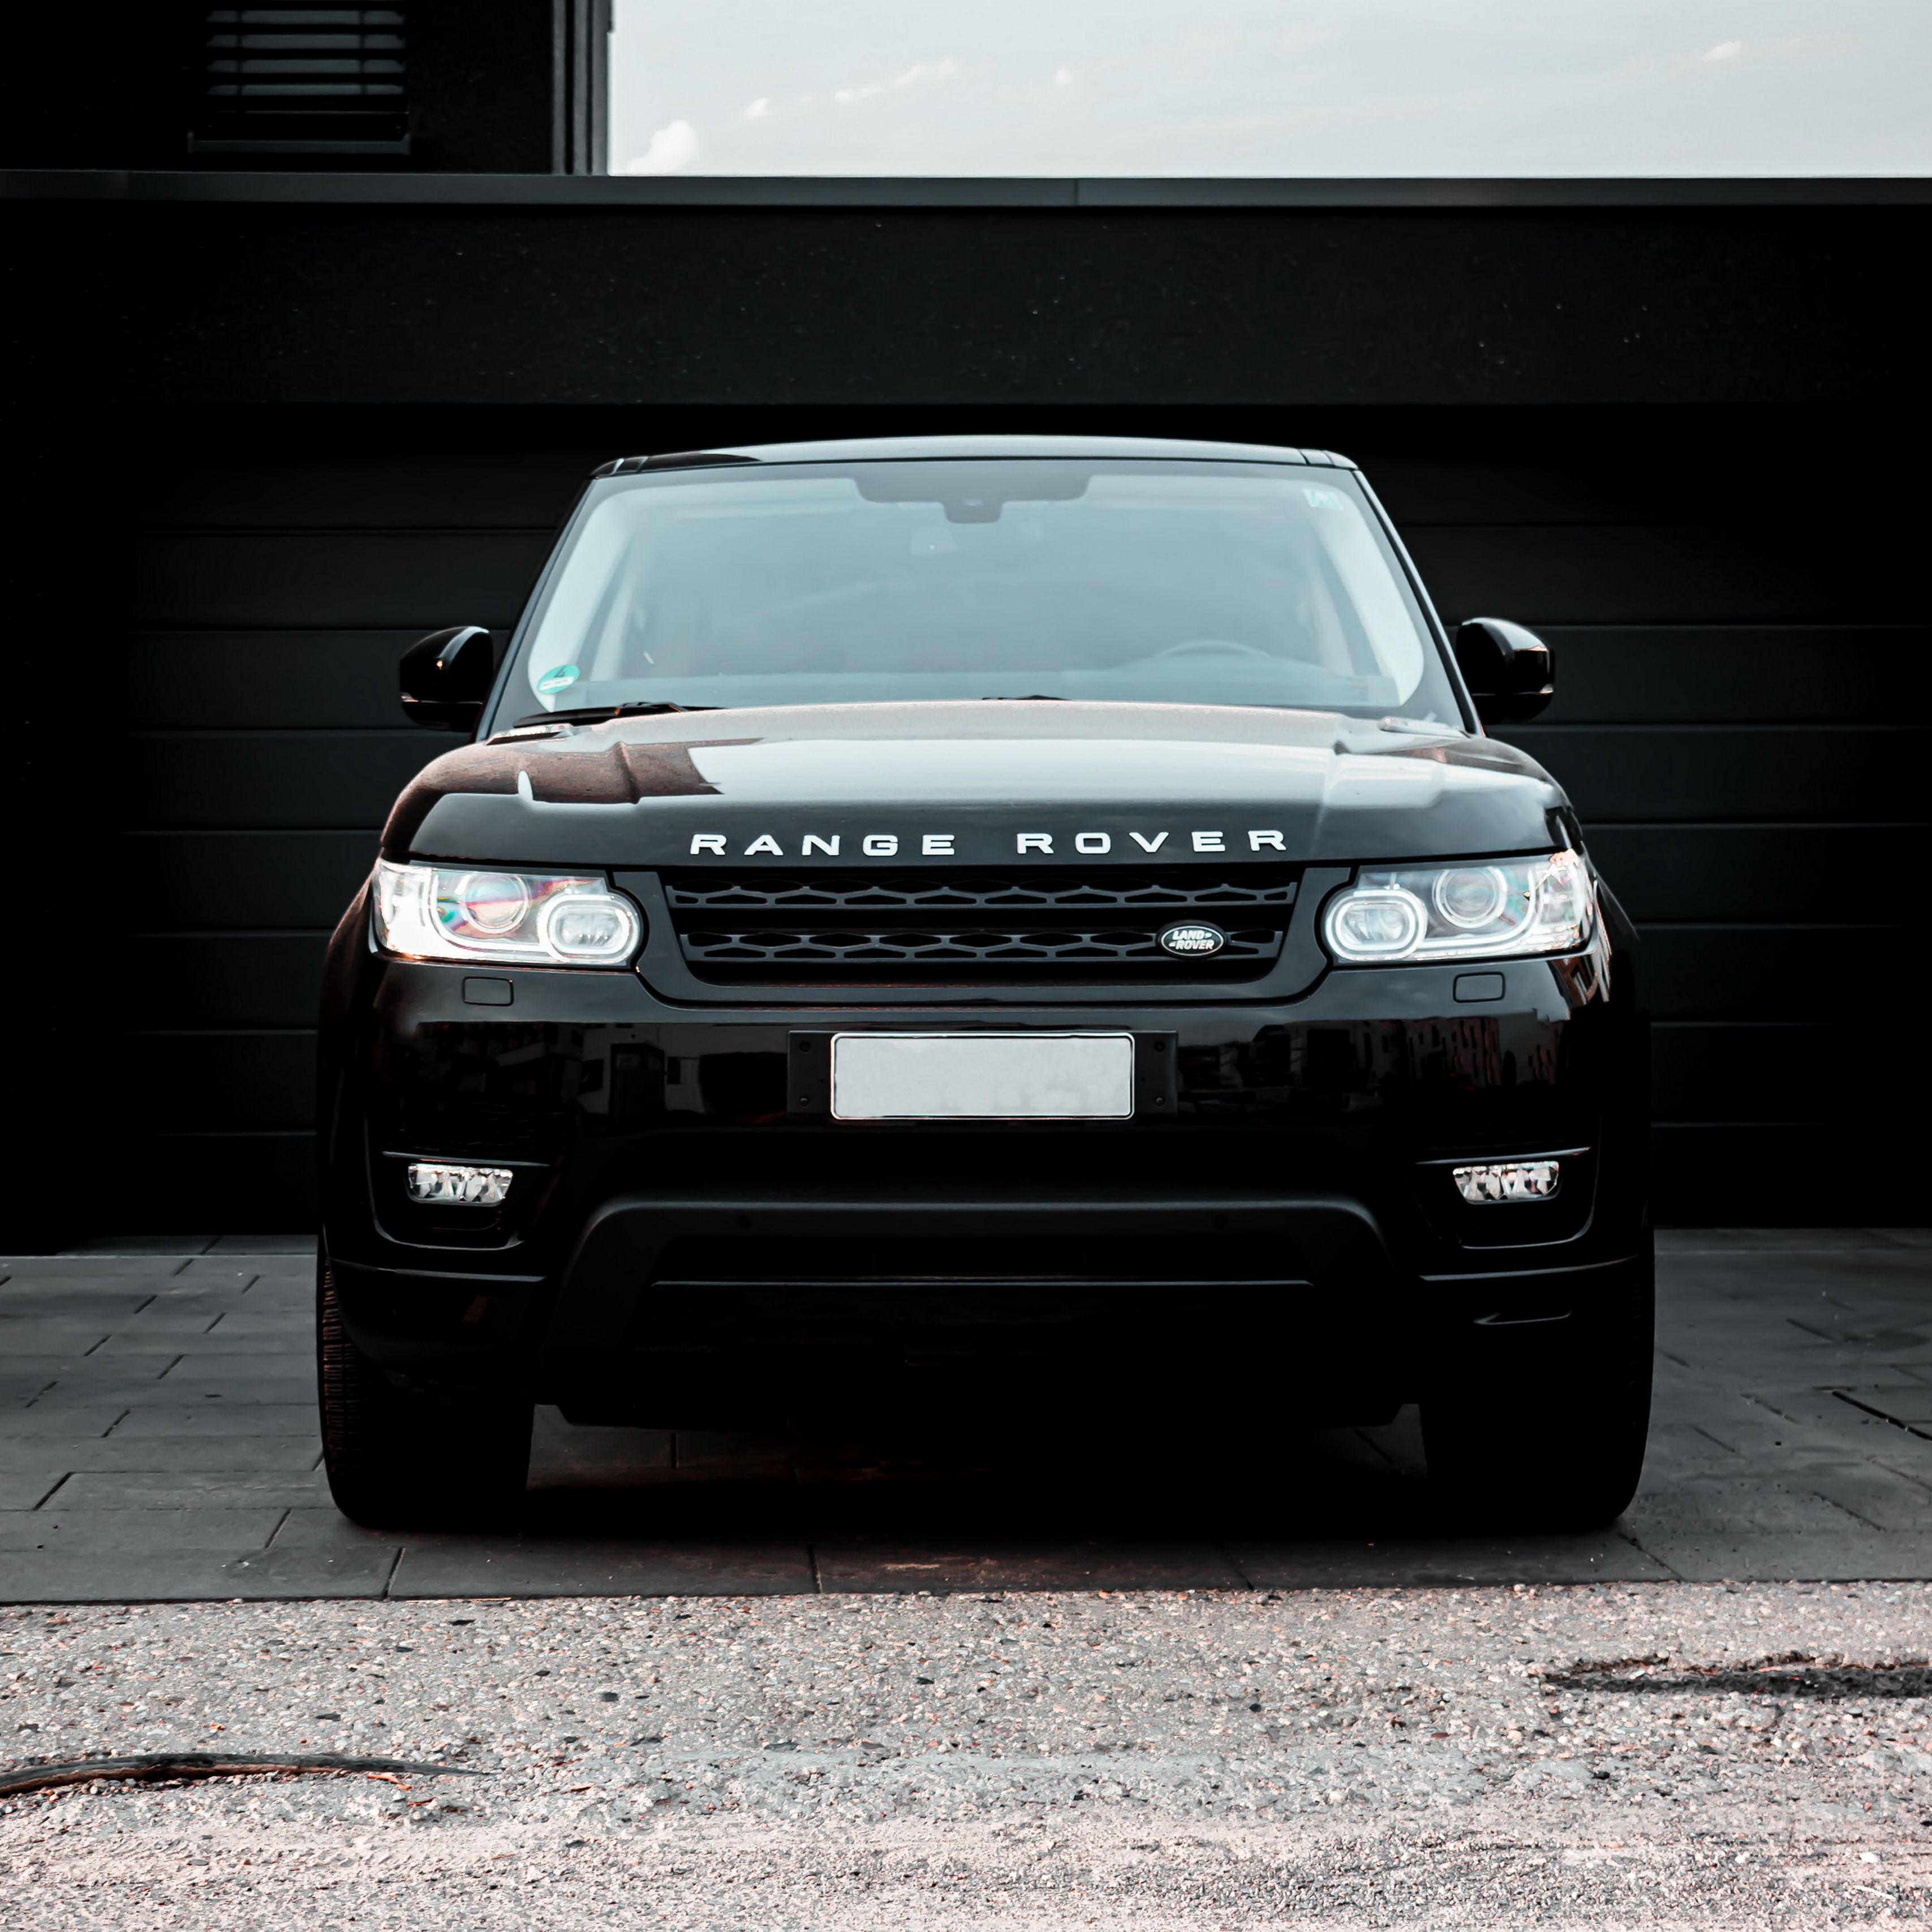 Download wallpaper 3415x3415 land rover, range rover, car, black, suv, front view ipad pro 12.9 retina for parallax HD background